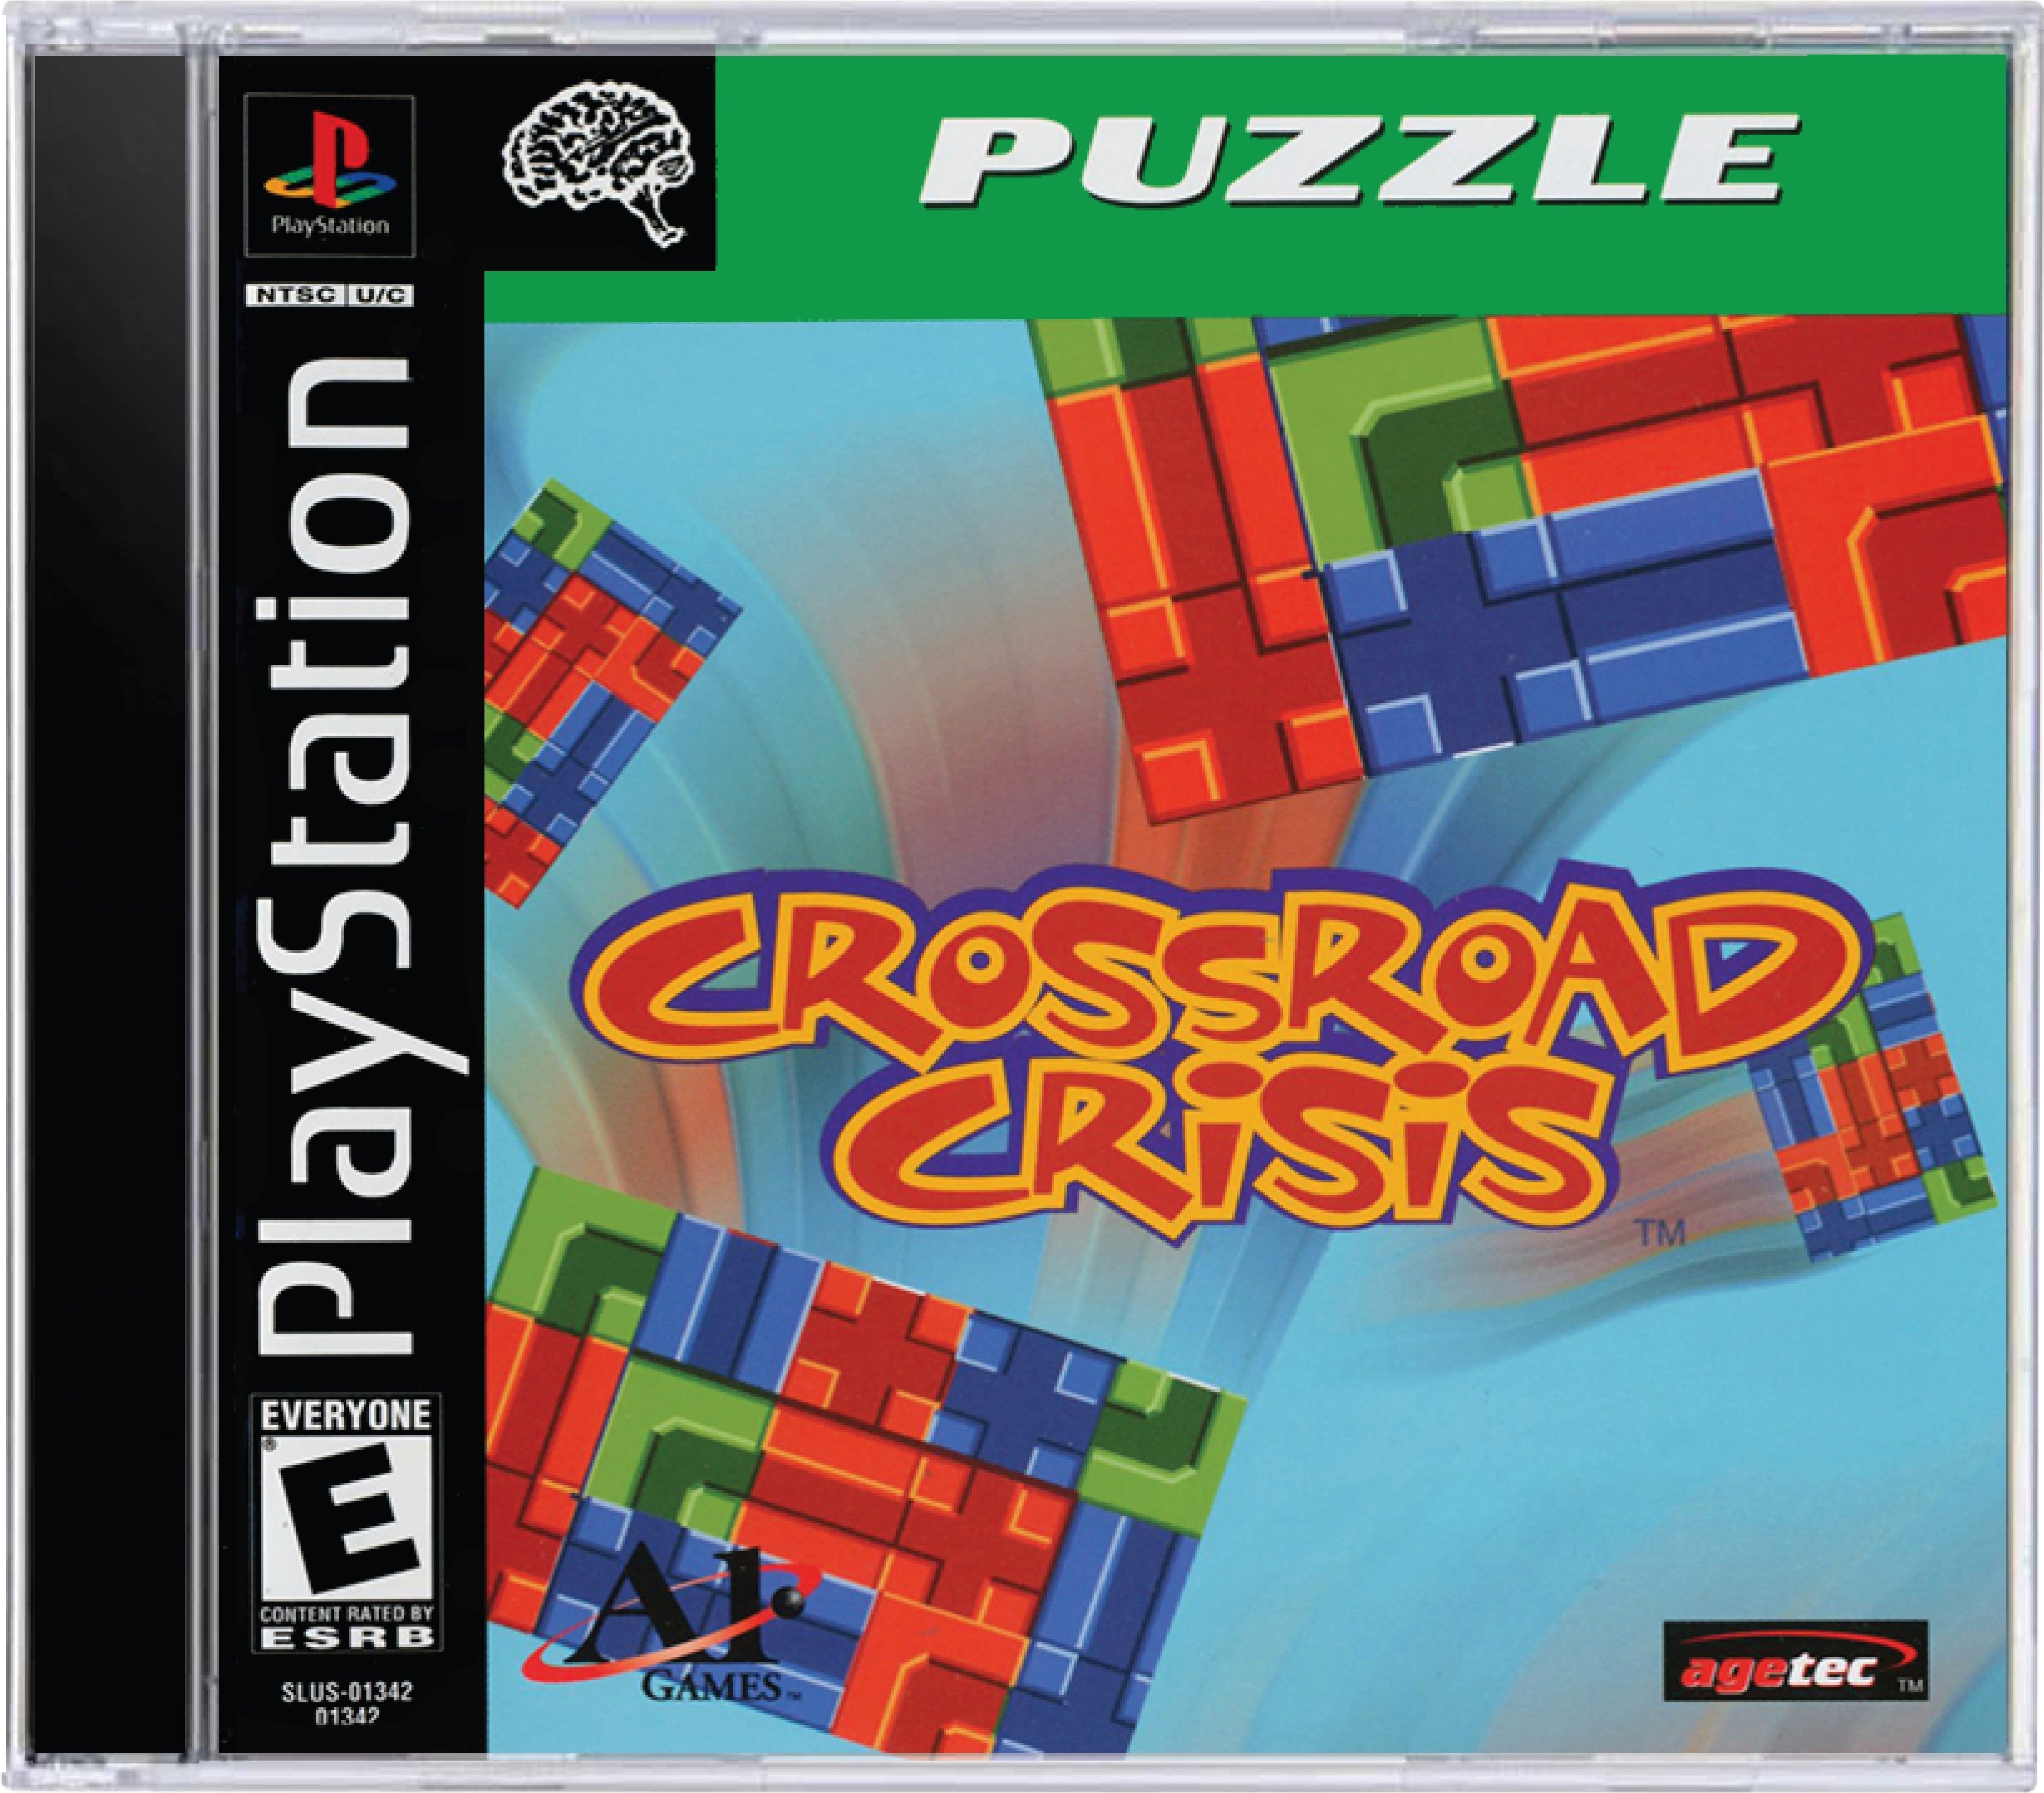 Crossroad Crisis Cover Art and Product Photo